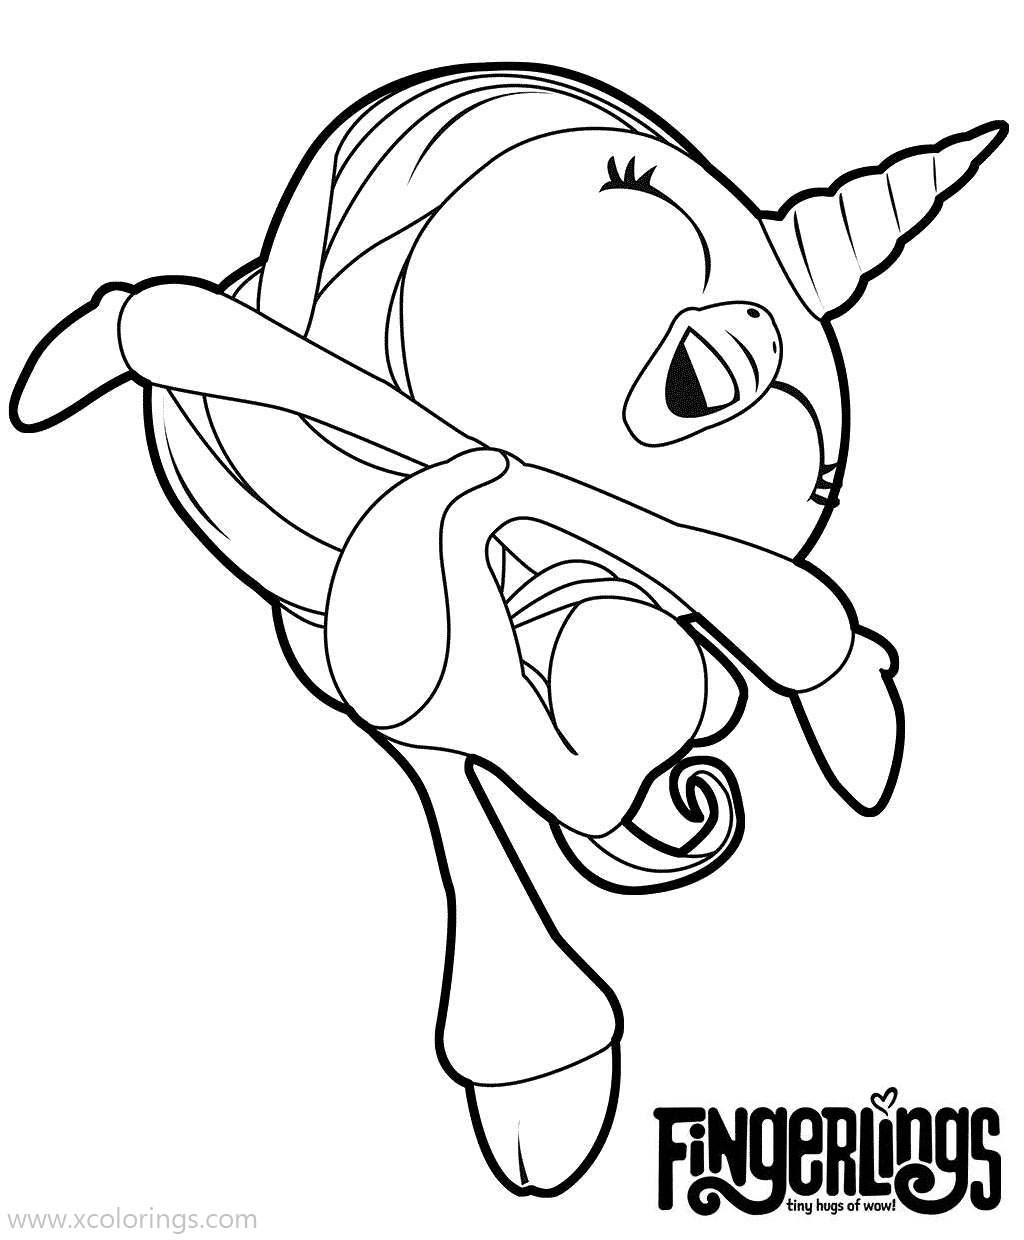 Free Fingerlings Unicorn Coloring Pages Gigi printable